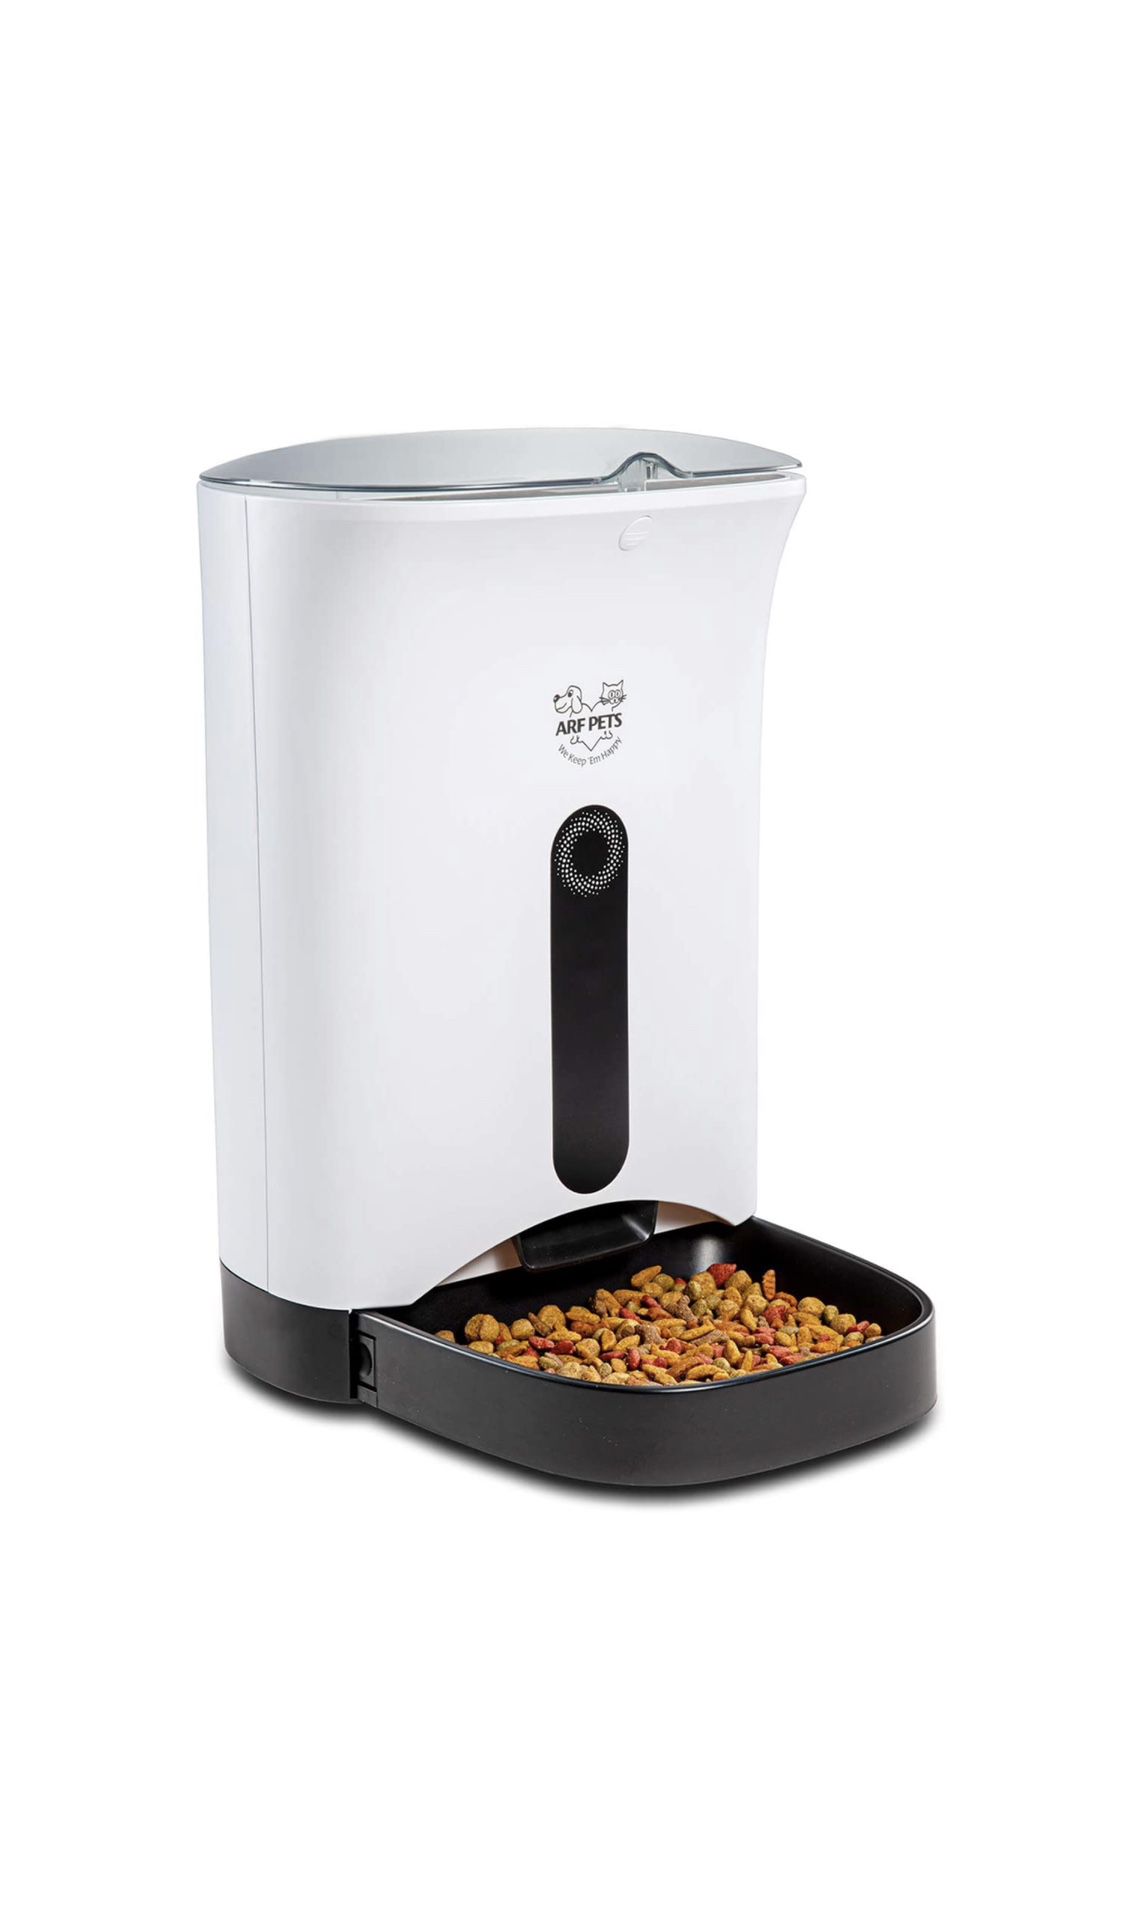 Automatic Pet Feeder (New In Box)